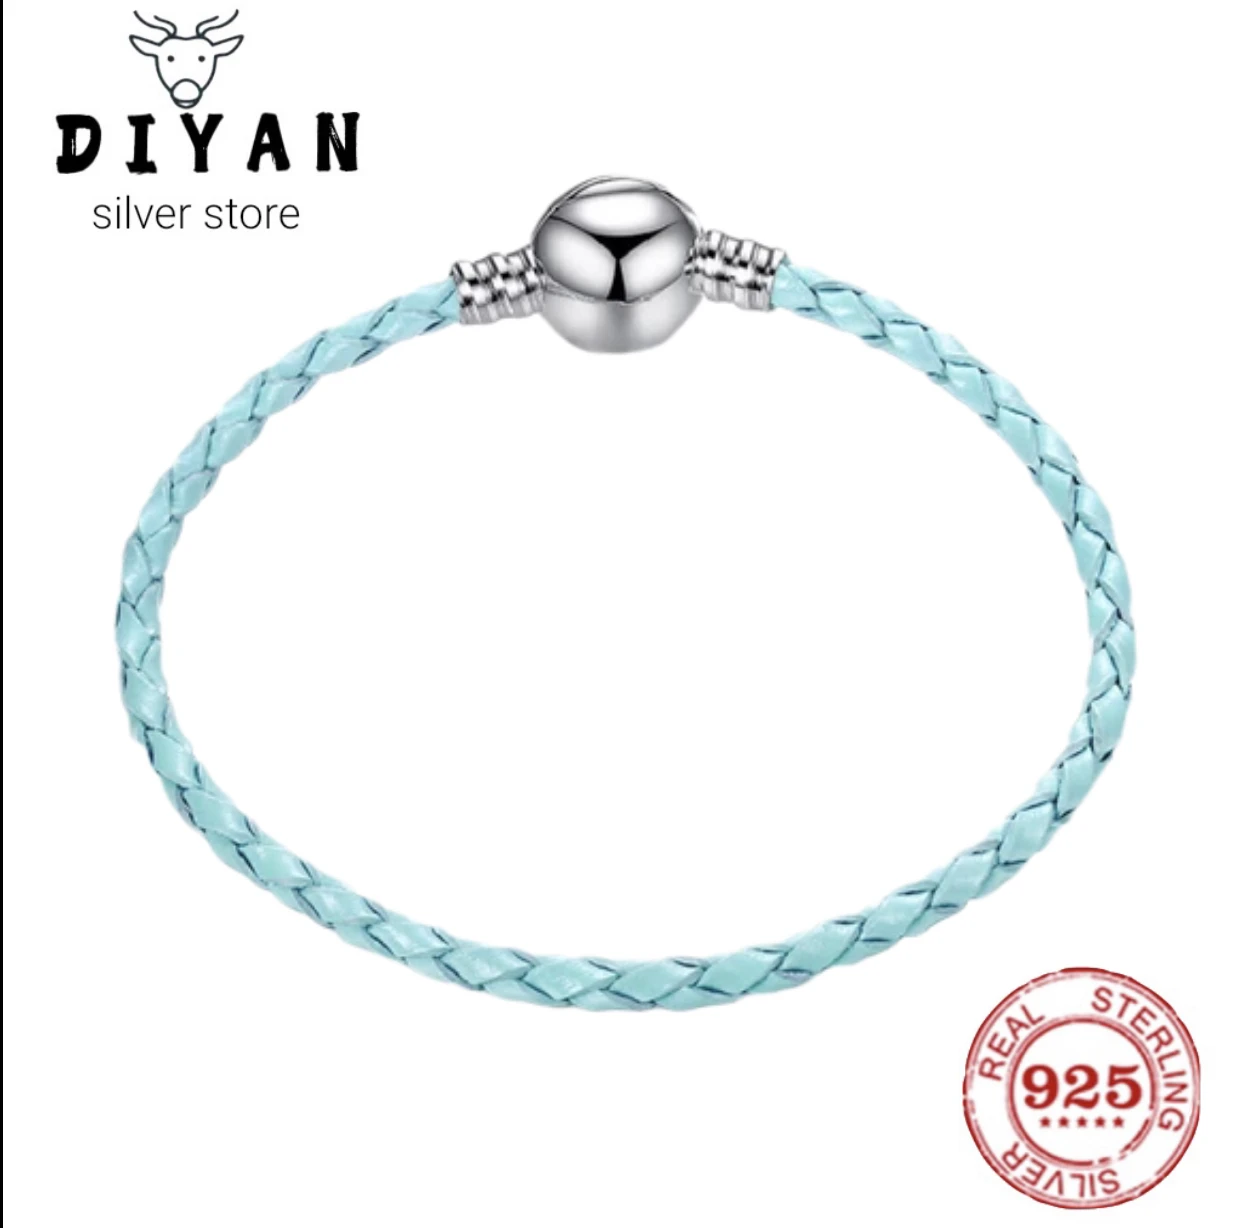 Hot selling 925% Sterling Silver Fitted original exquisite elegant leather women's bracelet party birthday charm jewelry gift